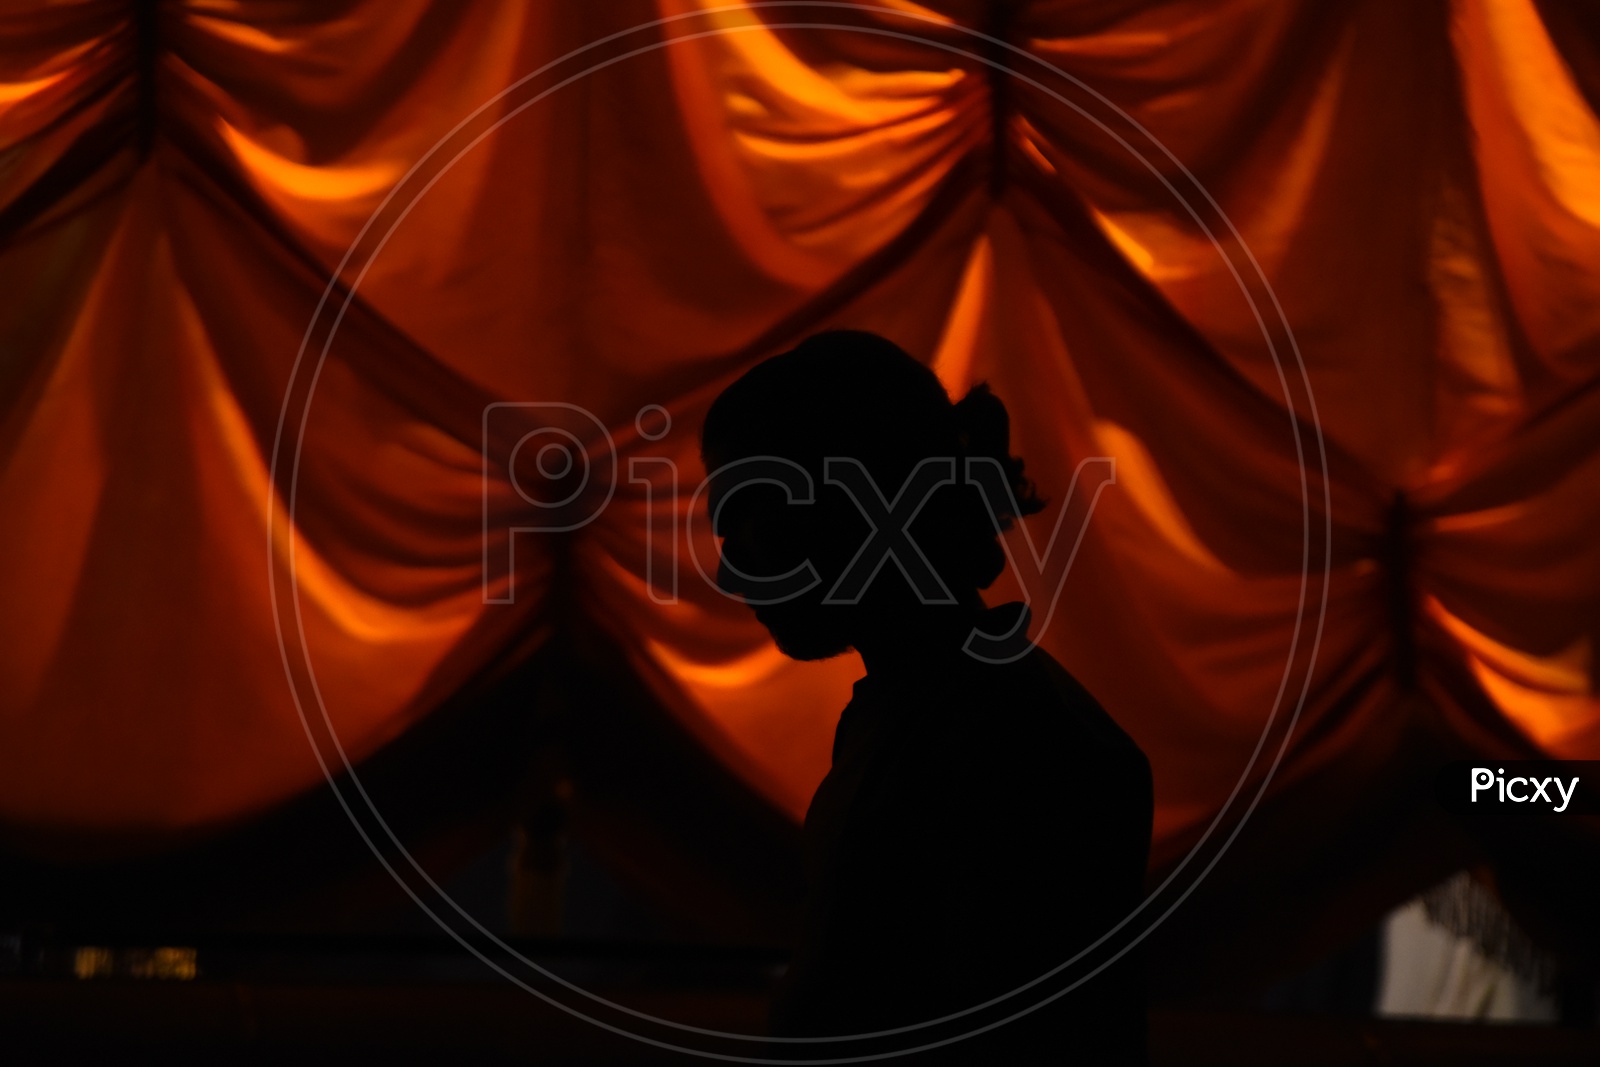 Silhouette of a woman with a red background